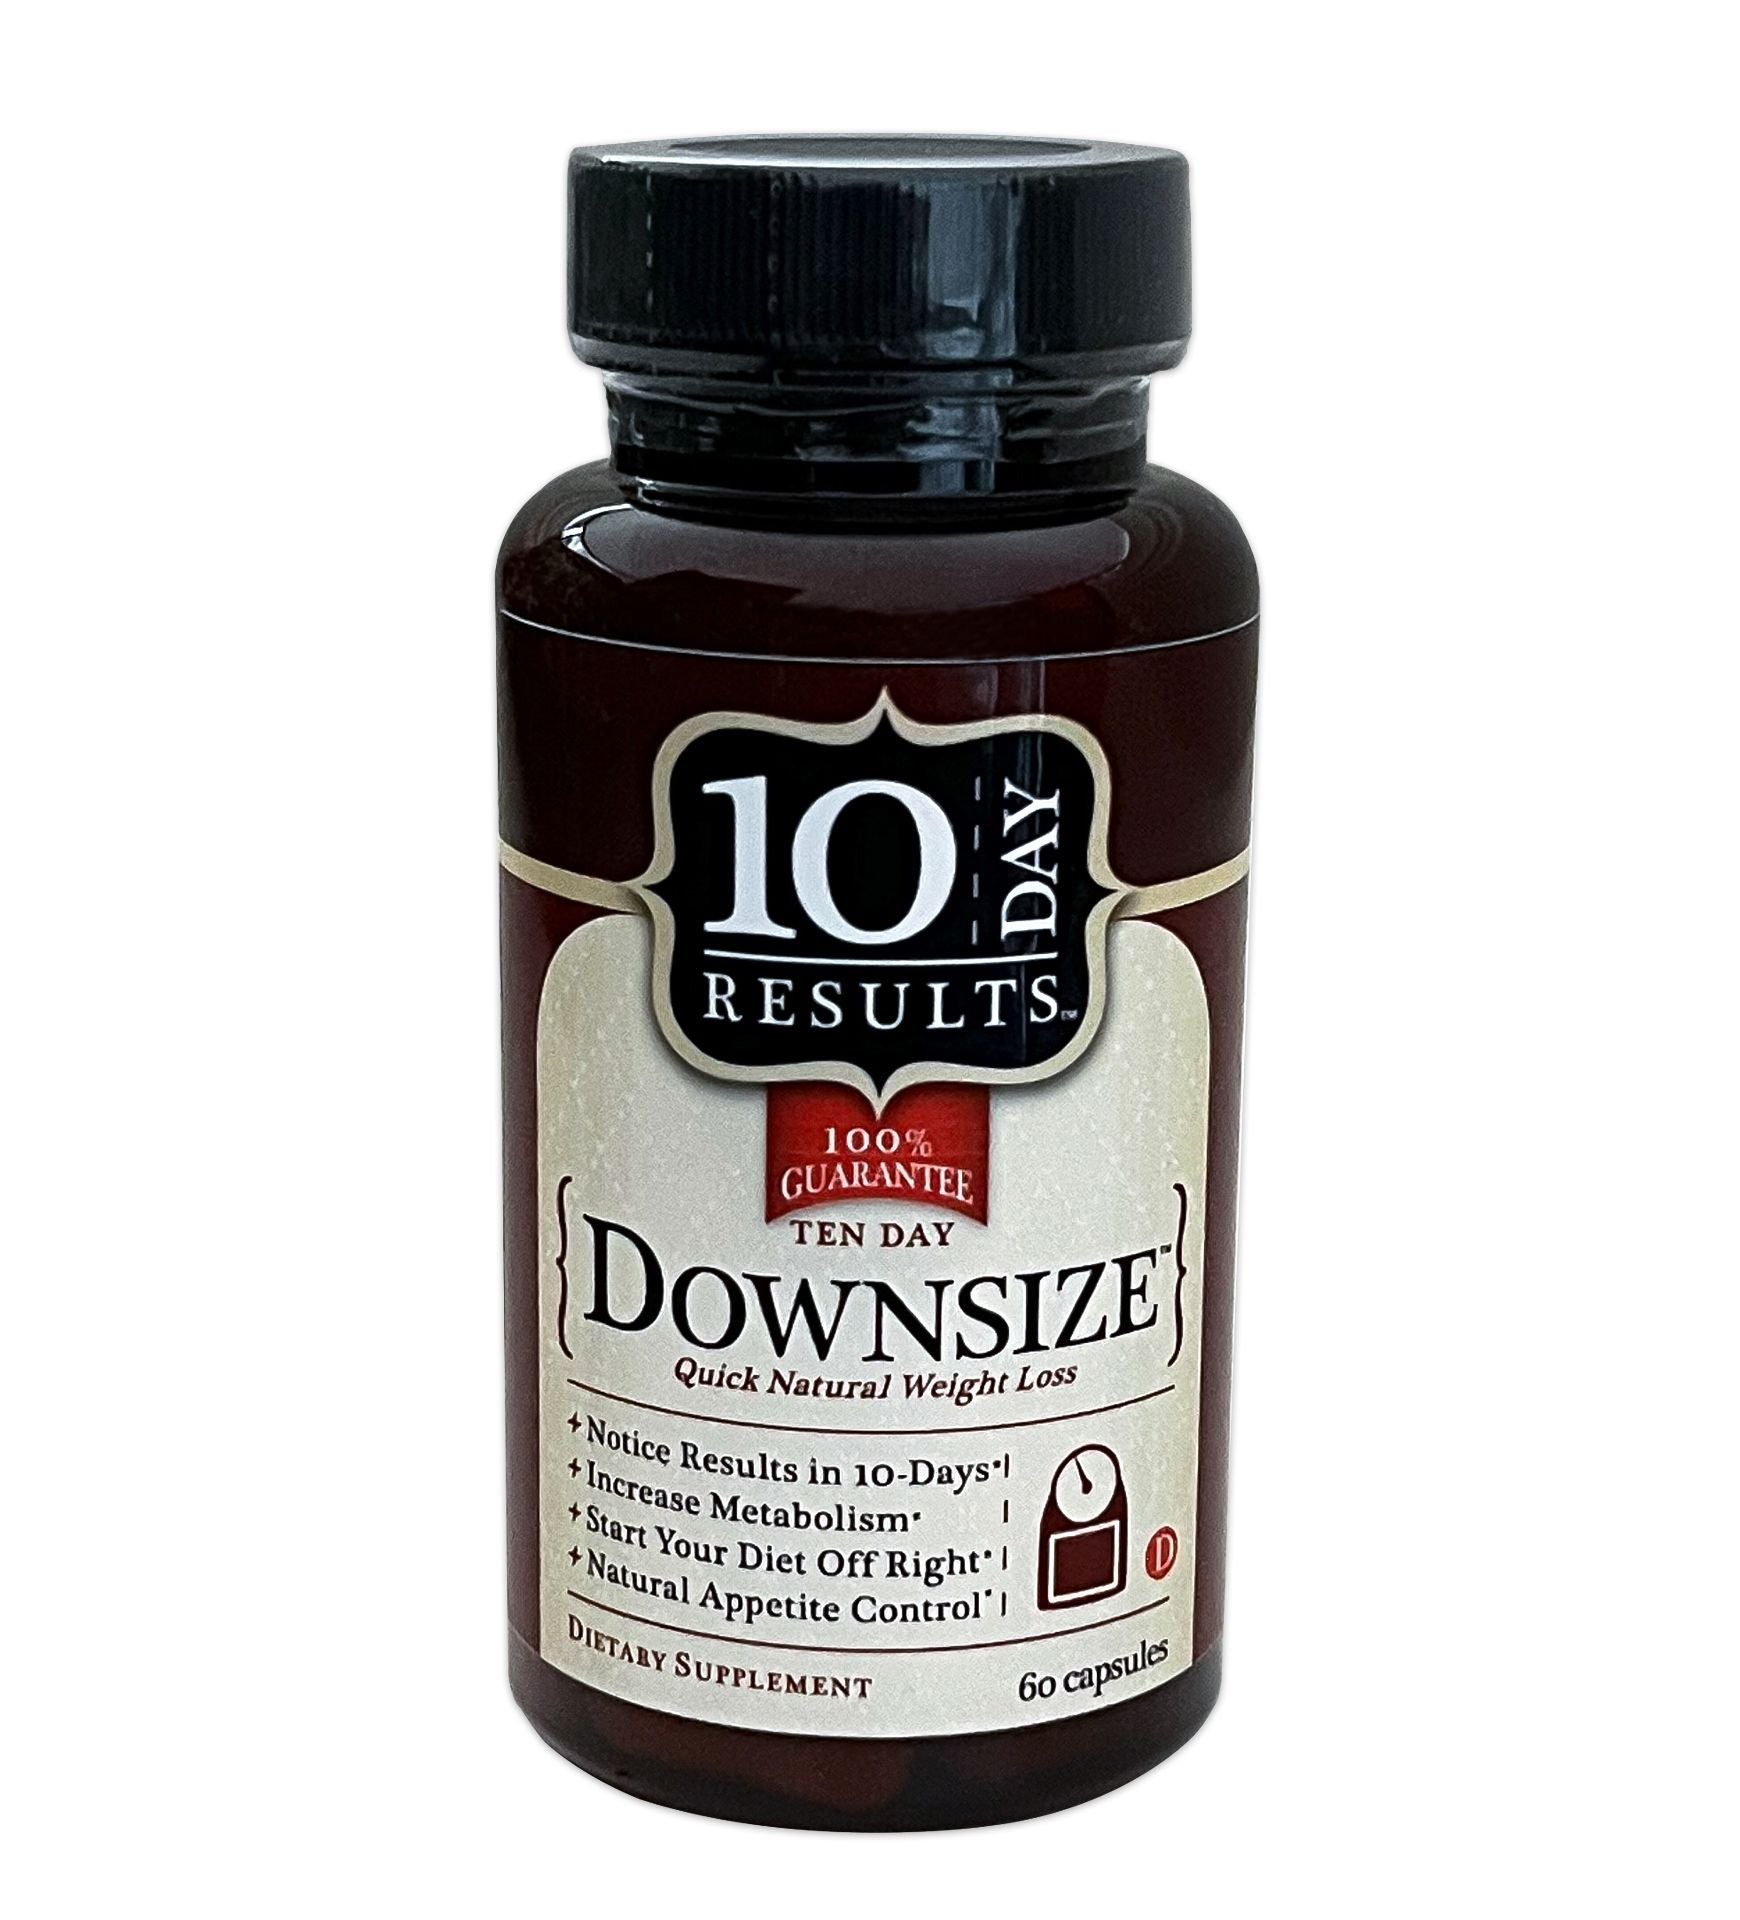 Downsize Quick Natural Weight Loss